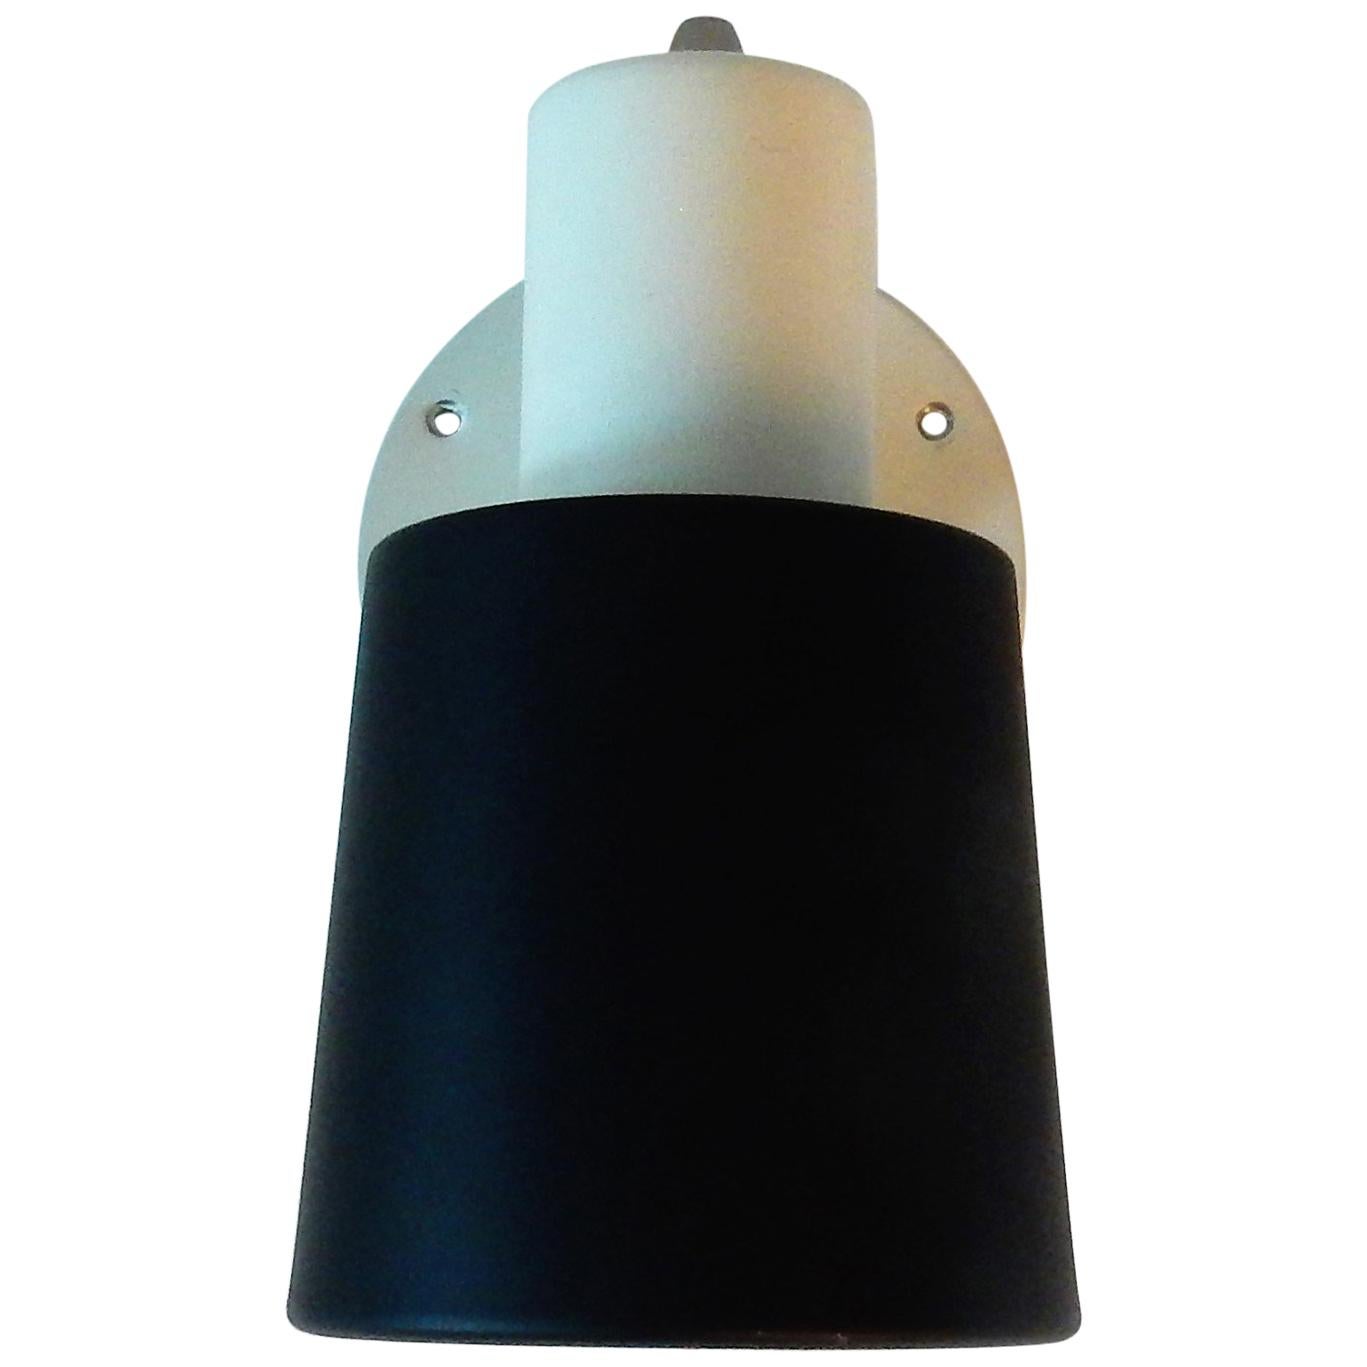 Black and White 'Model 7062' Anvia Wall Lamp, The Netherlands, 1960s